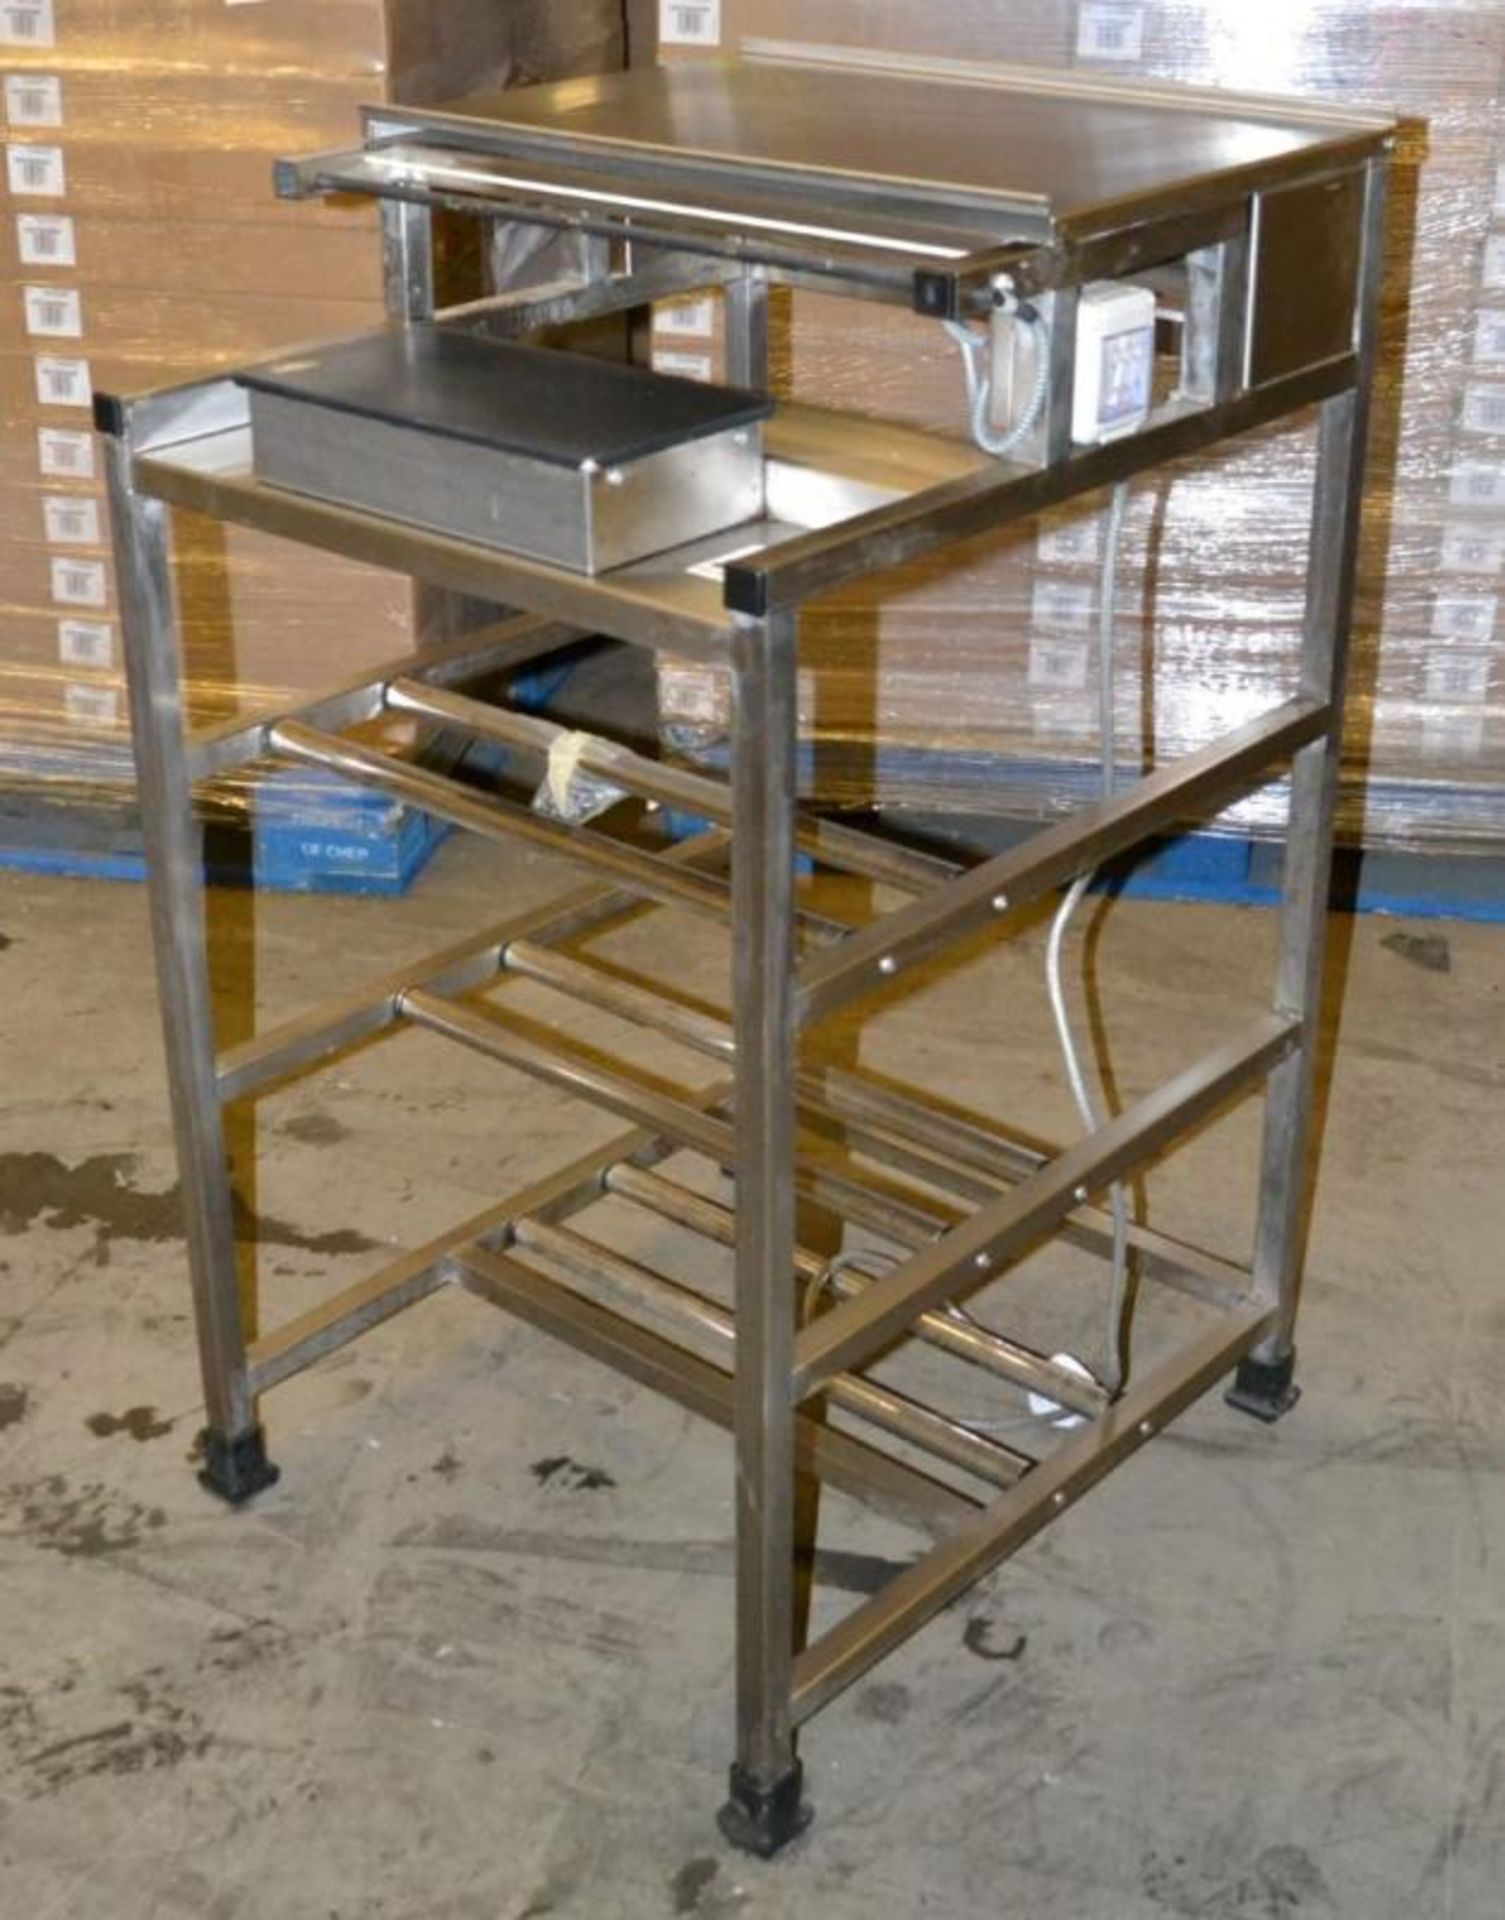 1 x Metalcraft Tray Stretch Wrapping Machine - Dimensions: 56 x 61.5 x 94.5cm - Ref: MC139 - CL282 - - Image 3 of 10